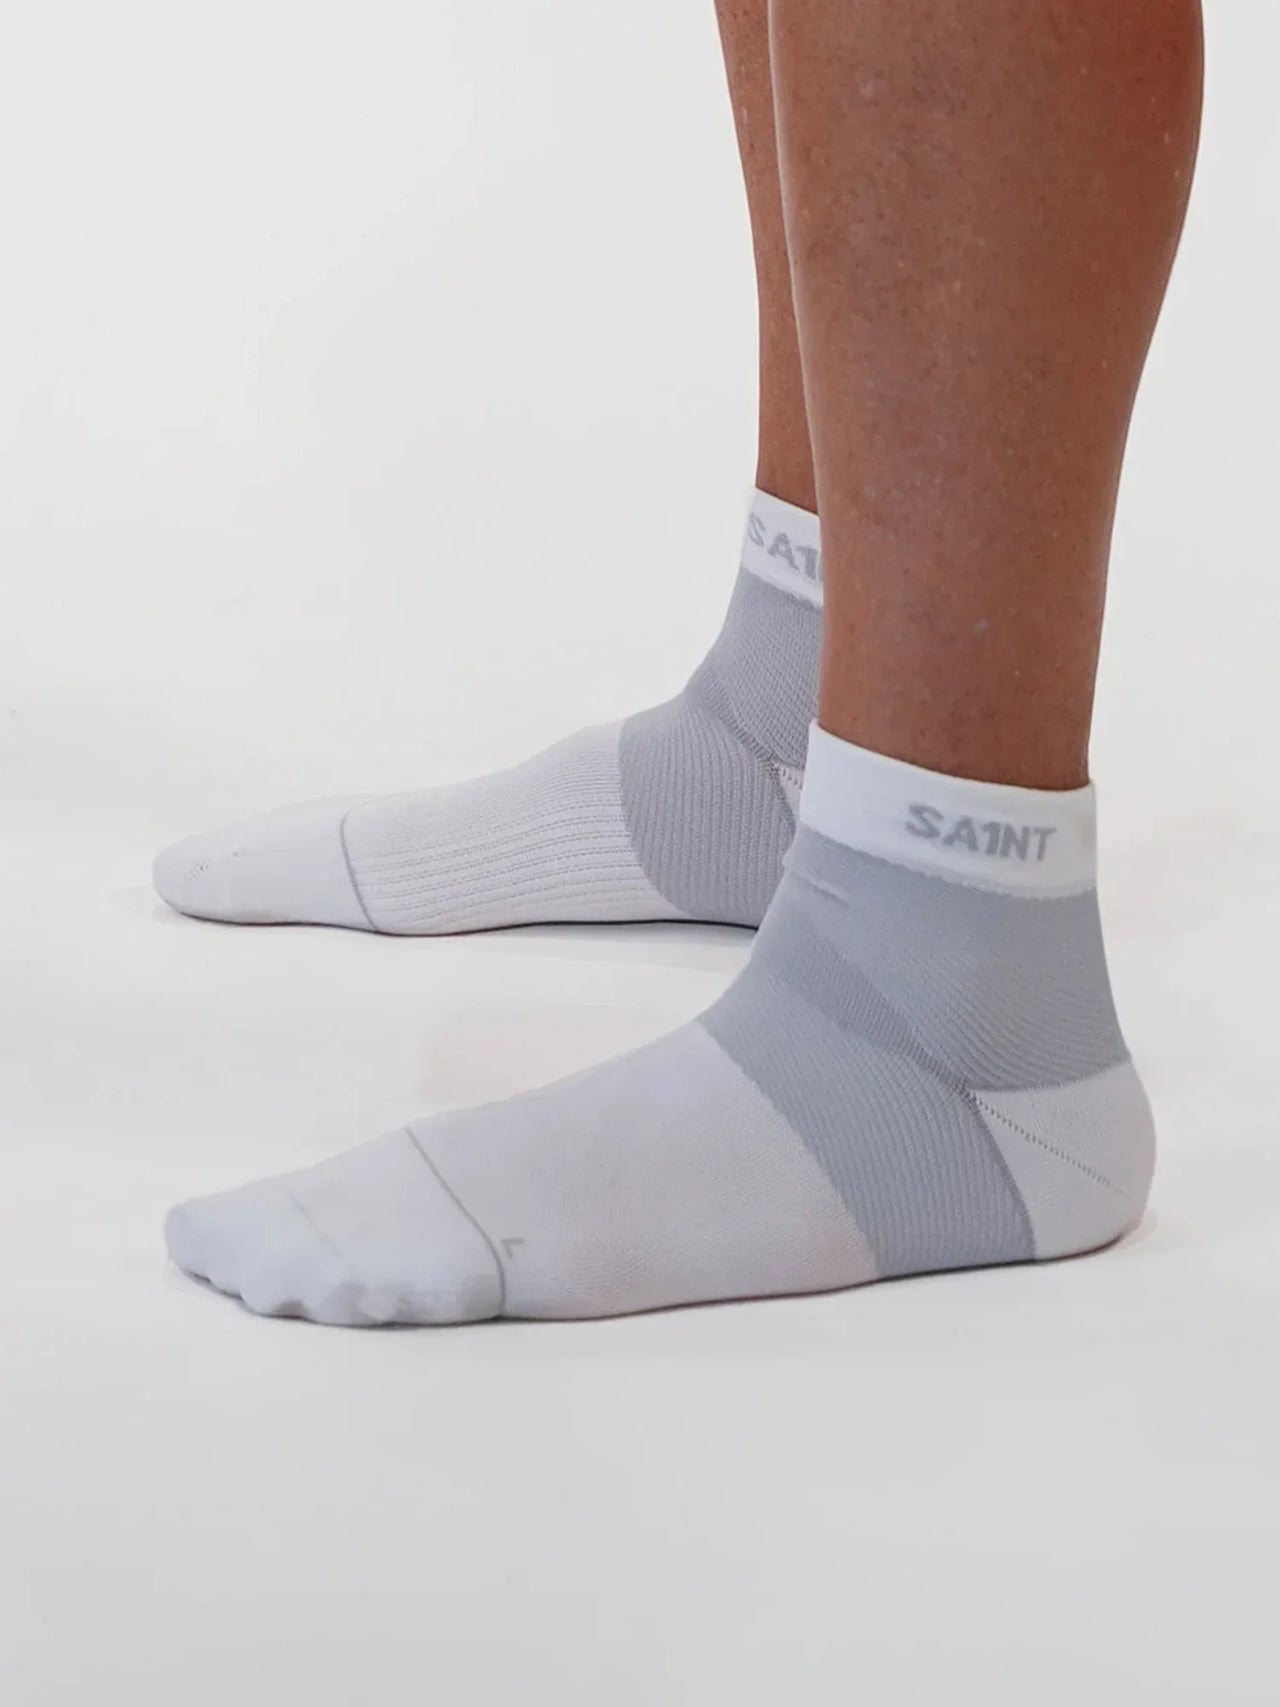 **Low-Cut Ankle Support Socks - White**